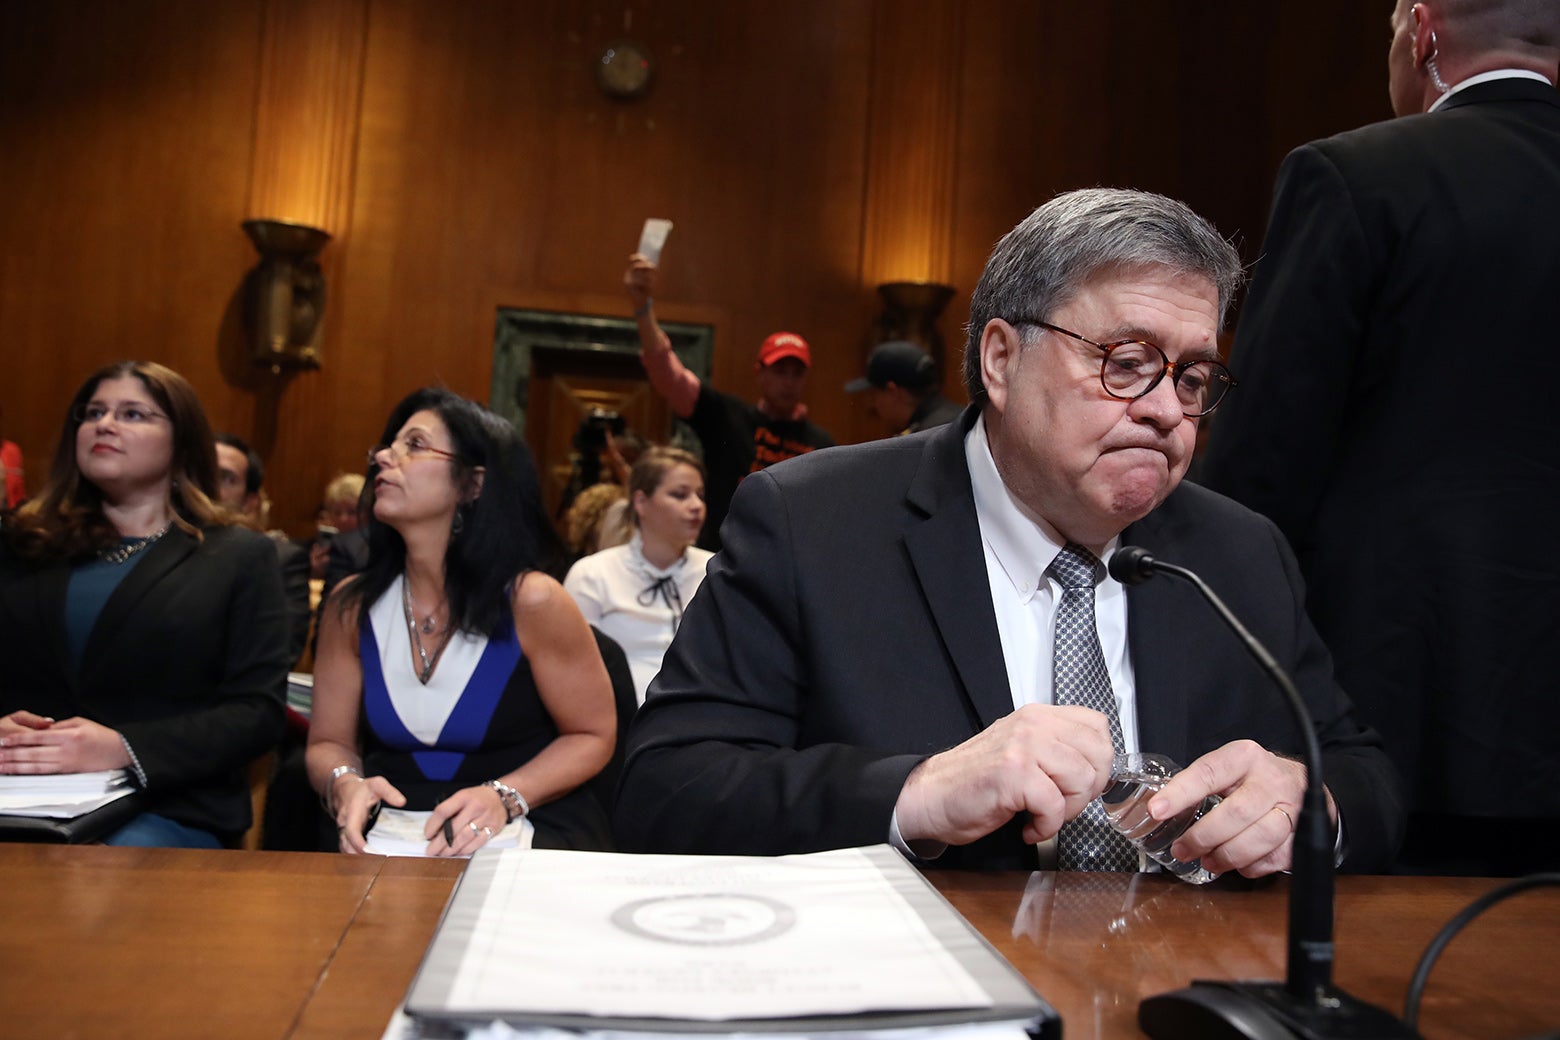 Attorney General William Barr arrives to testify before the Senate Appropriations Committee.